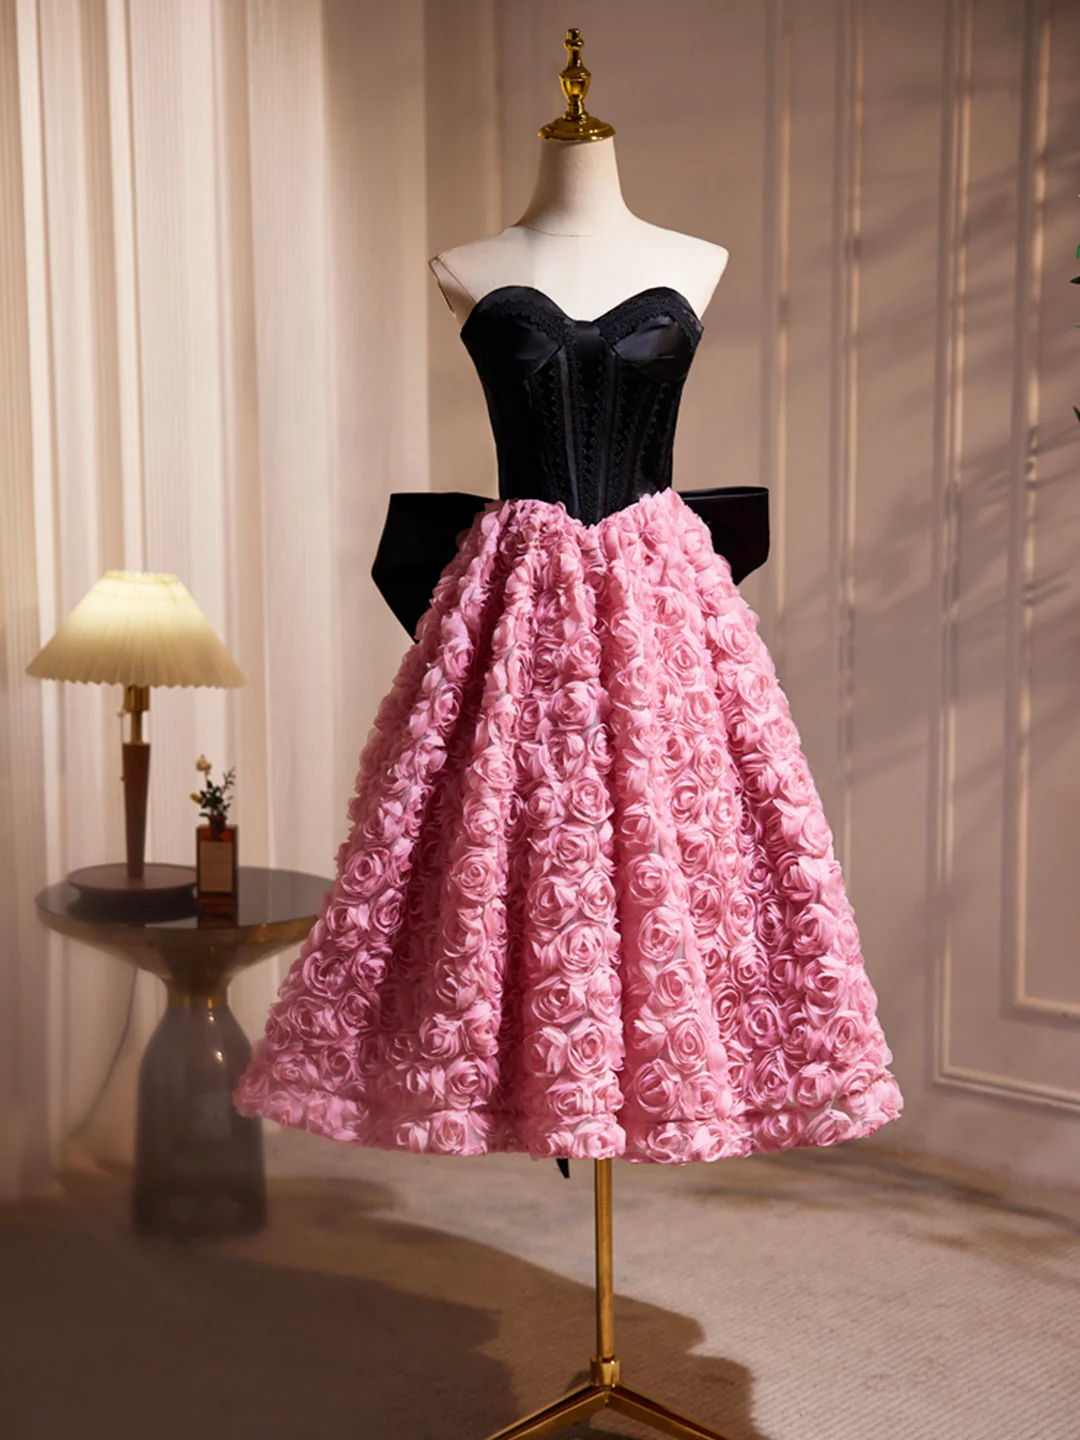 Black Satin And Pink Ruffle Flower Short Prom Dress, Lovely A-line Strapless Bow Party Cocktail Dress